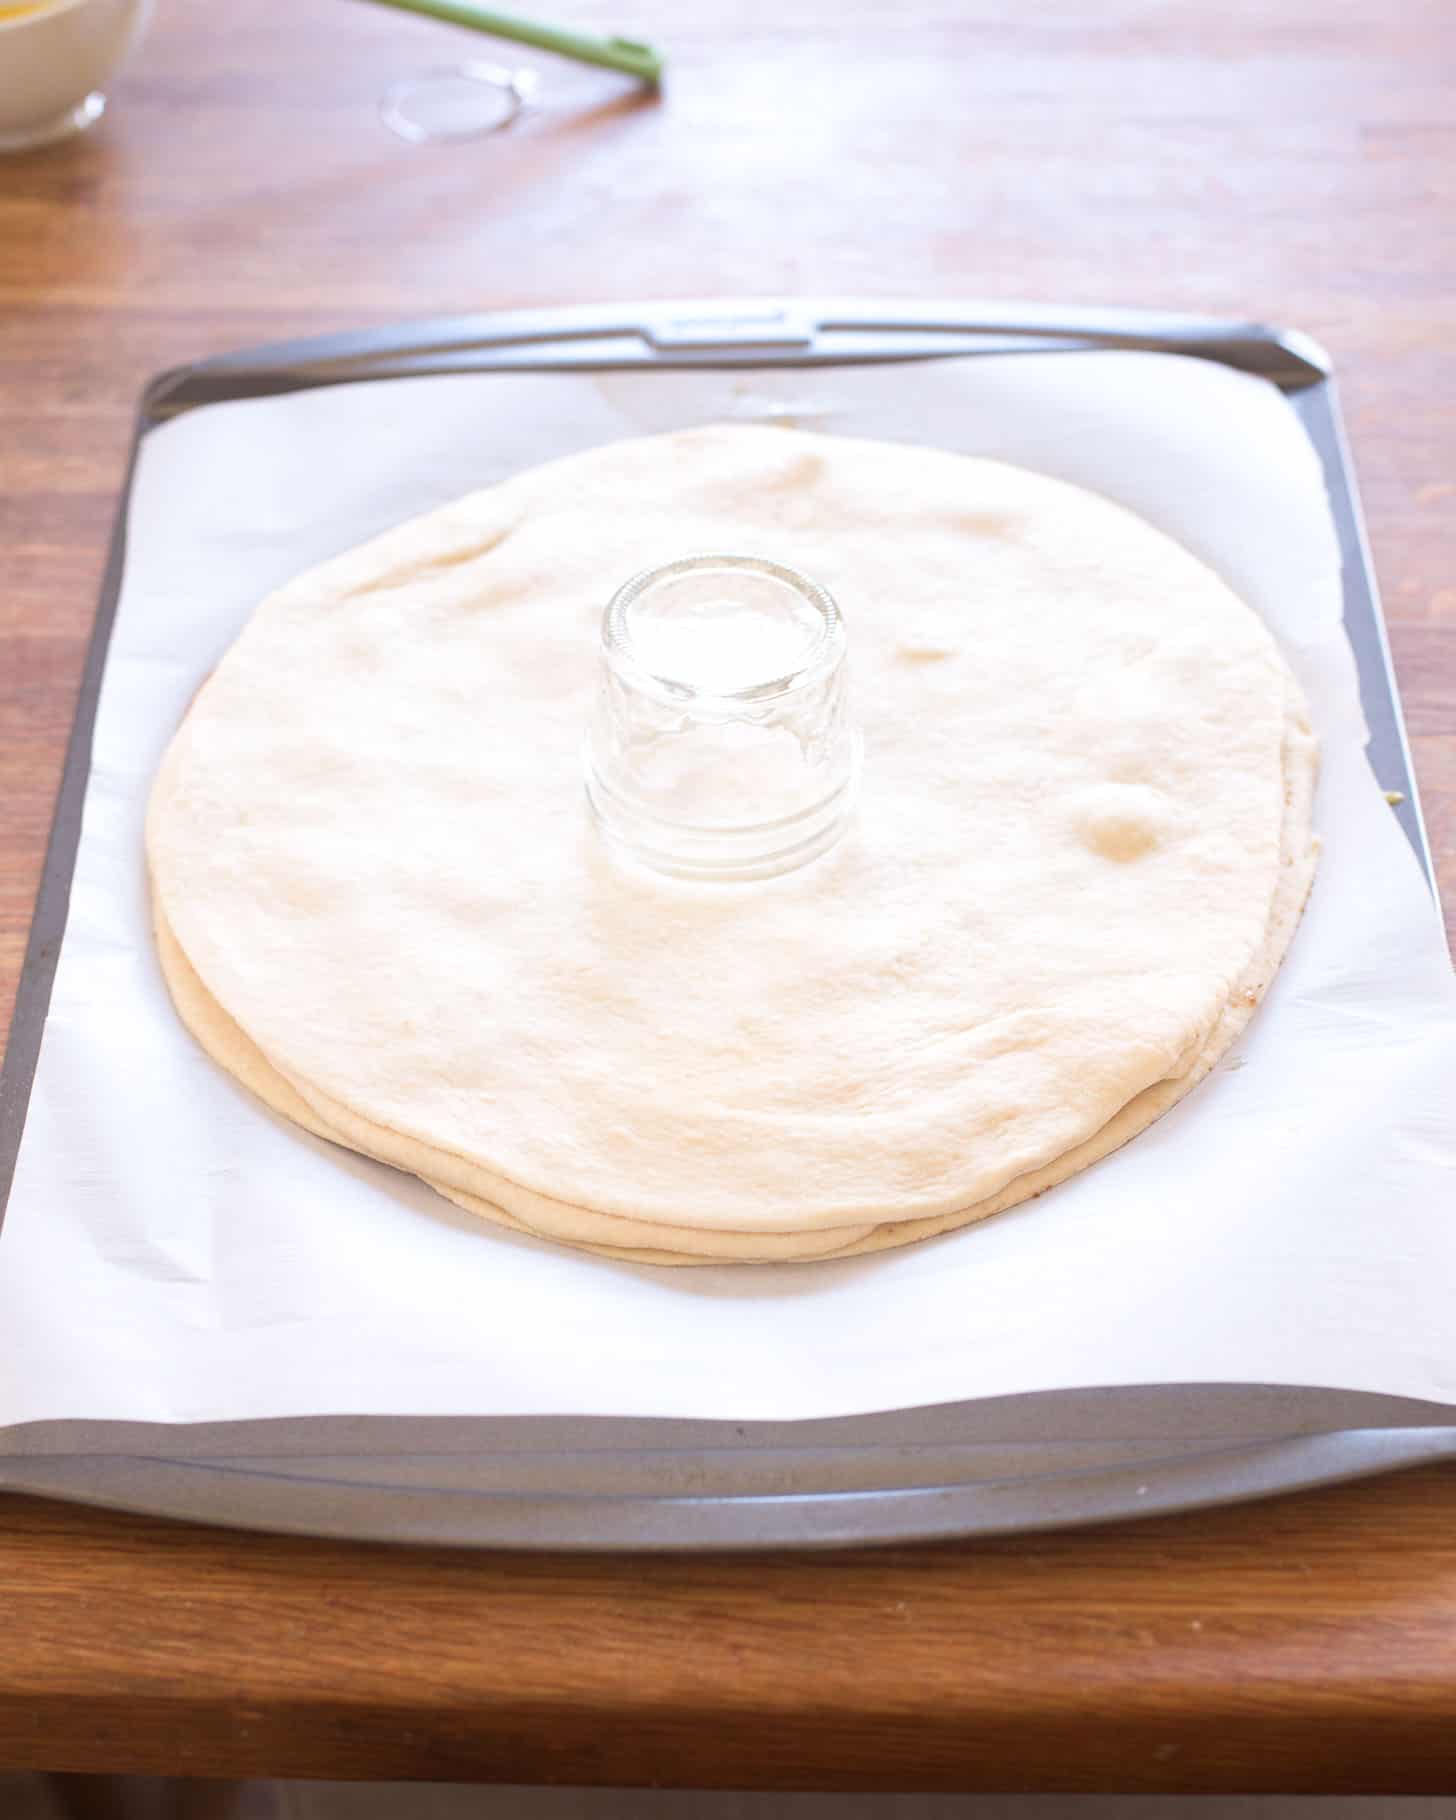 several layers of dough circles with a small glass jar in the middle